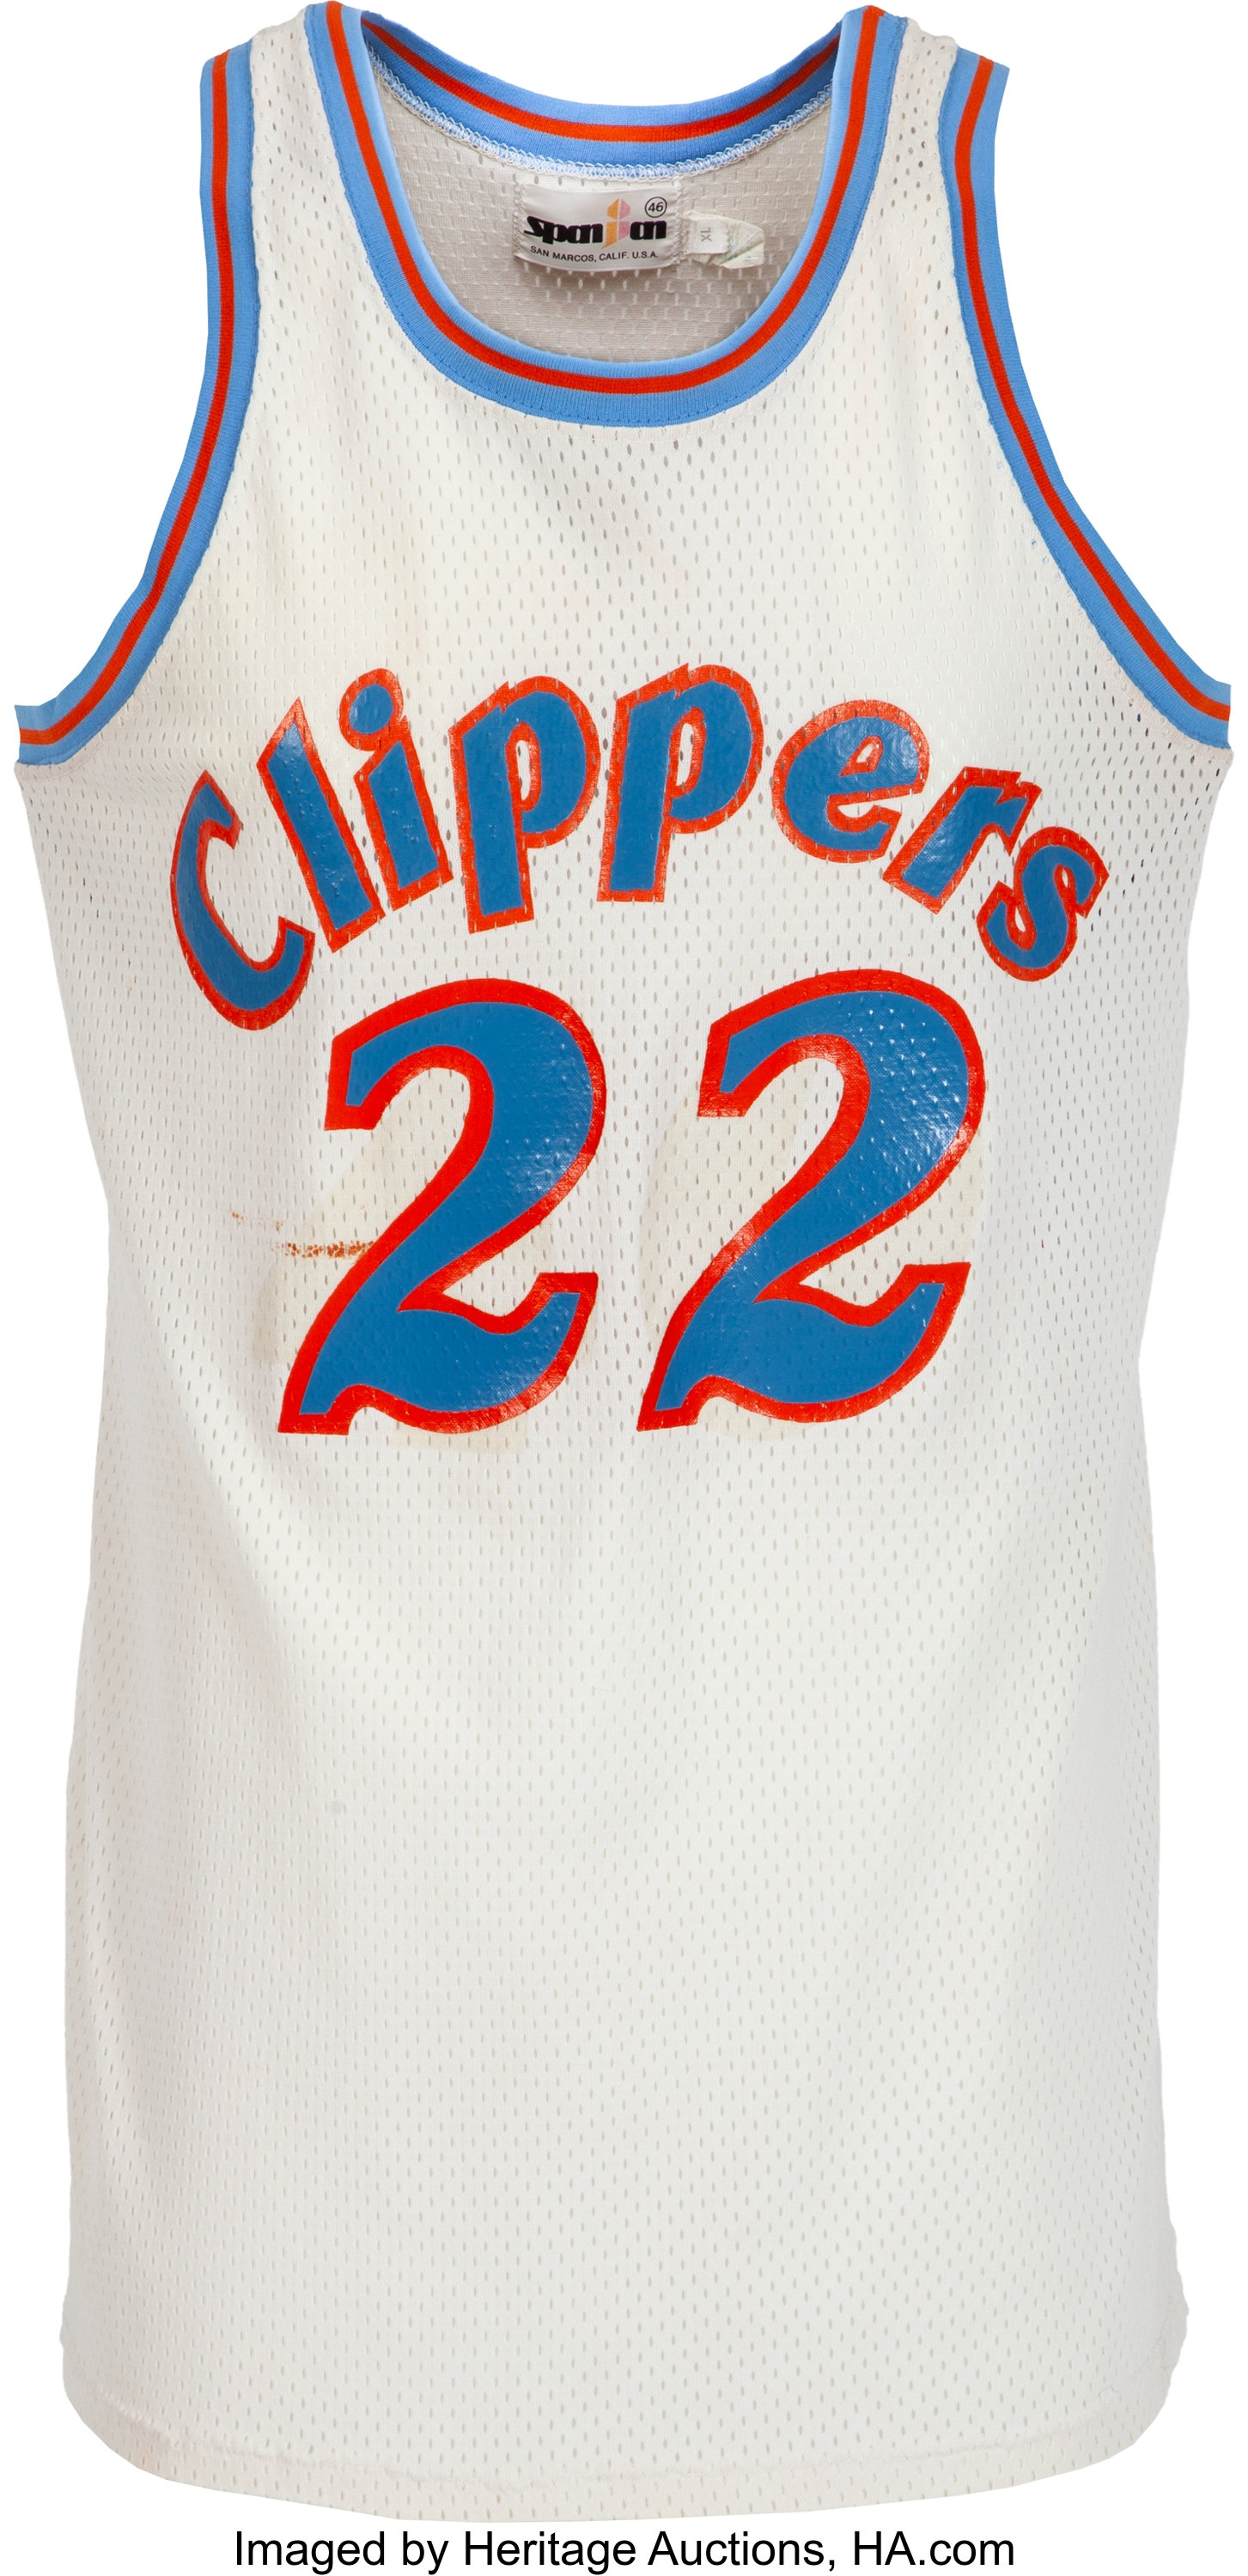 1981-82 Tom Chambers Game Worn San Diego Clippers Rookie Jersey